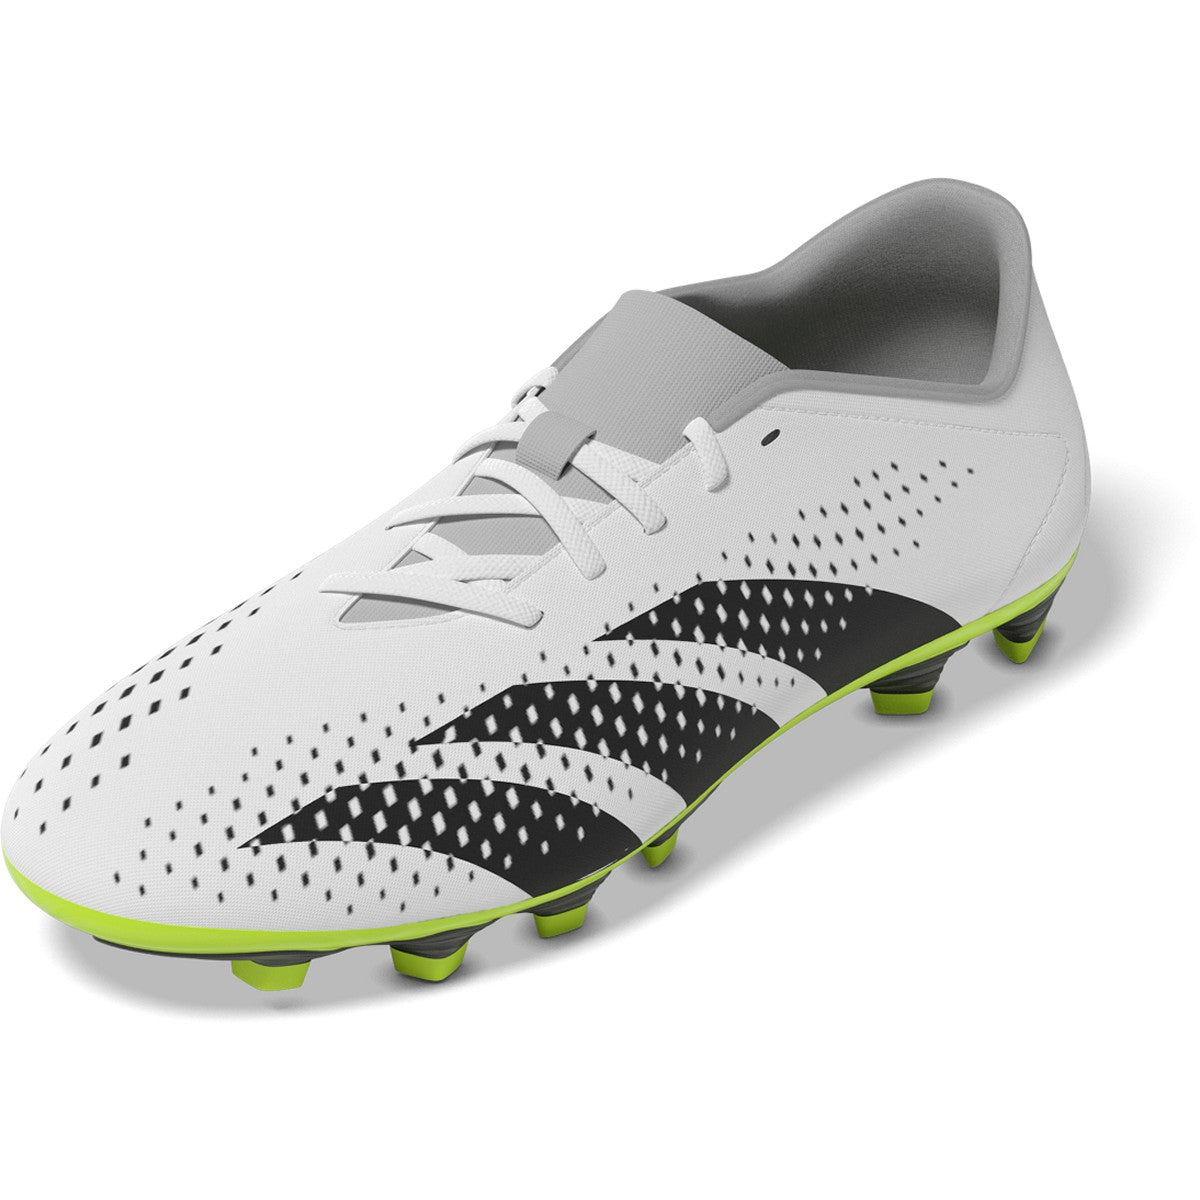 adidas – Soccer IE9434 Juniors Whit Soccer Predator Zone Cleats Accuracy.4 FxG Cloud